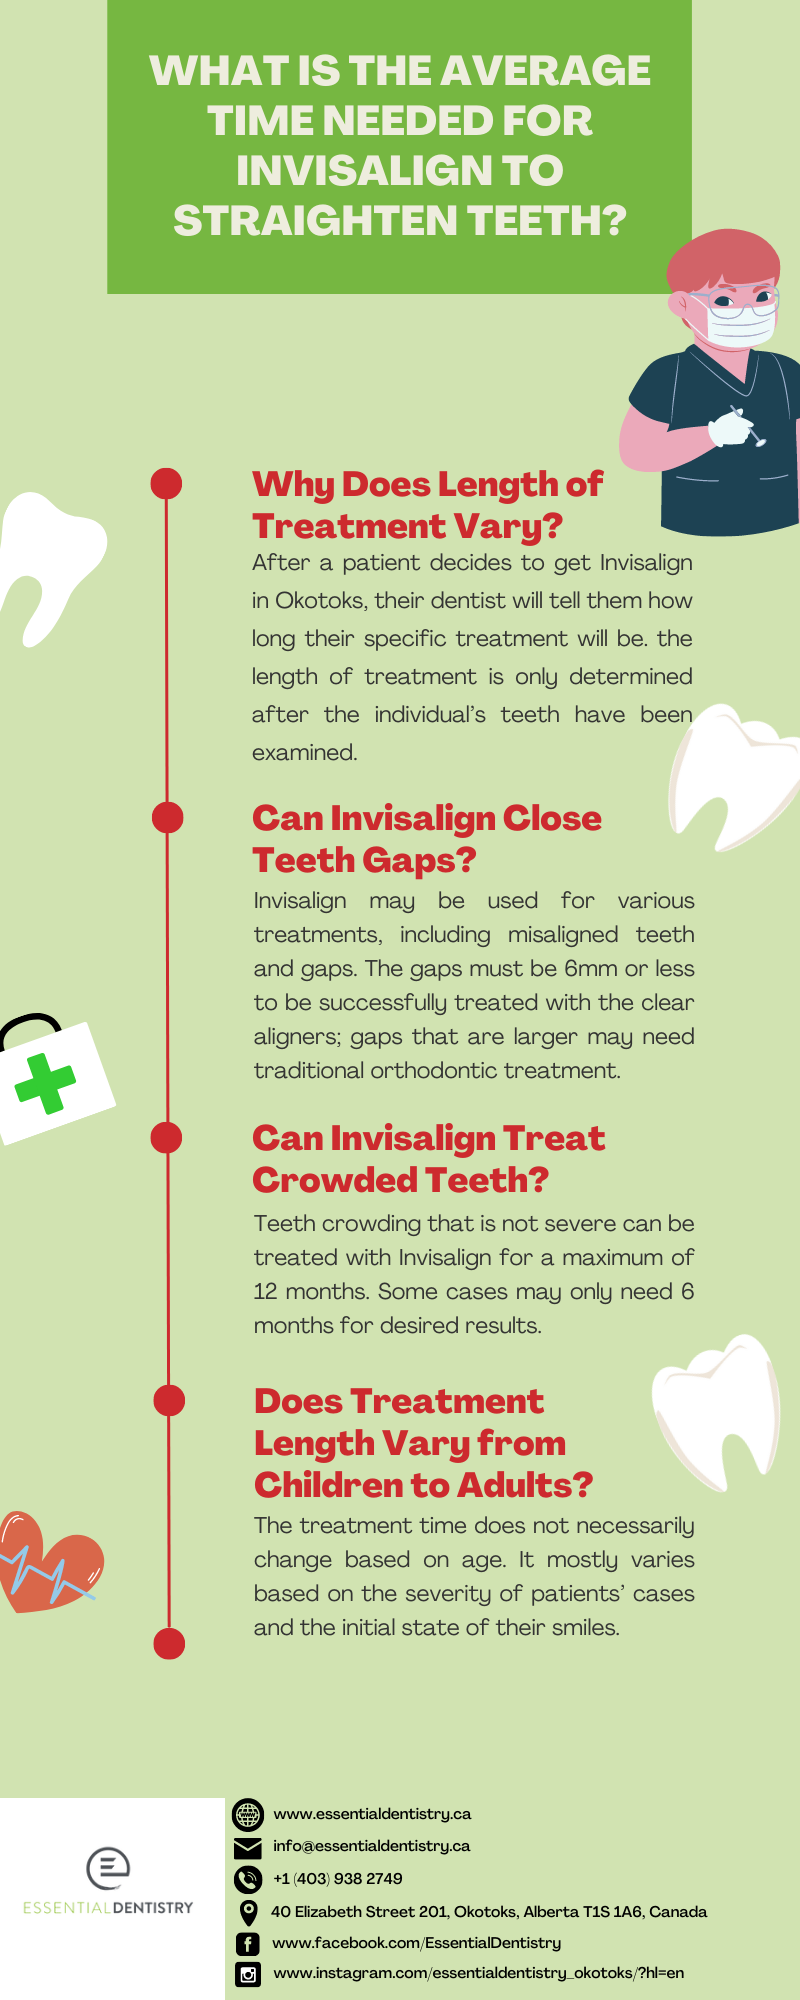 WHAT IS THE AVERAGE
TIME NEEDED FOR

INVISALIGN TO
STRAIGHTEN TEETH?

 

Why Does Length of
Treatment Vary?
After a patient decides to get Invisalign
in Okotoks, their dentist will tel them how
long their specific treatment will be the
length of treatment is only determined
after the individual's teeth have been
examined

 

Can Invisalign Close
Teeth Gaps?

Invisalign may be used for various
treatments, including misaligned teeth
and gaps. The gaps must be 6mm or less
to be successfully treated with the clear

f aligners; gaps that are larger may need
» traditional orthodontic treatment
Can Invisalign Treat
Crowded Teeth?

Teeth crowding that is not severe can be
treated with Invisalign for a maximum of
12 months. Some cases may only need 6
months for desired results

Does Treatment

Length Vary from
Children to Adults?

The treatment time does not necessarily
change based on age. It mostly varies
based on the severity of patients’ cases
and the initial state of their smiles

 

® www essentialdentistry ca
~ NF ~fomessentiakientistryca
@ ® 1 «03 0382709
DENTISTRY @ 20 Exzabeth Streat 201. Okotoks, Alberta T1S 146, Canada
€) vw facebook com EssentialDentistry
[EE] vwwinstagram com essentiaidentistry okotoks 2=en